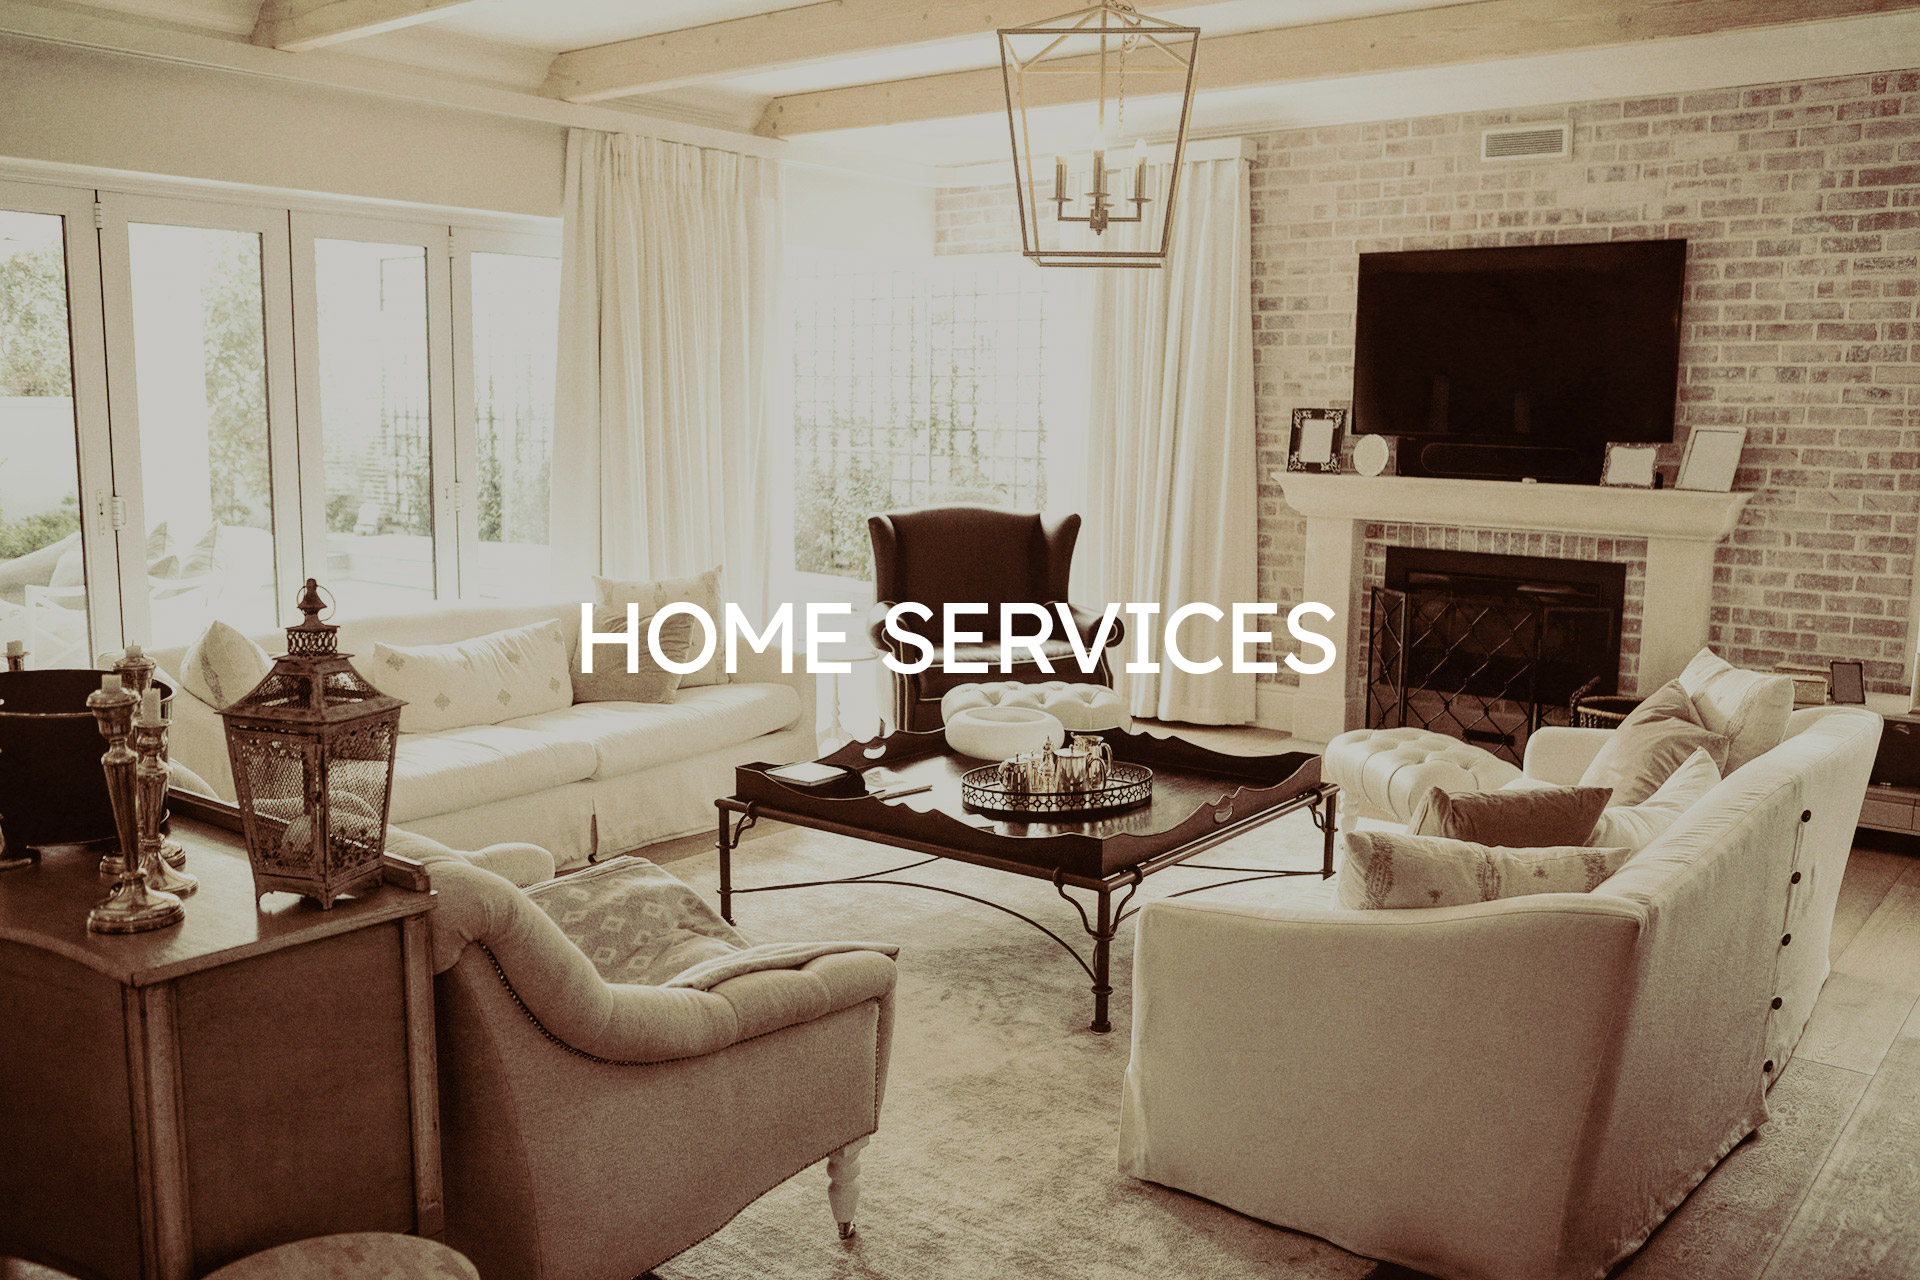 004_HOME_SERVICES2